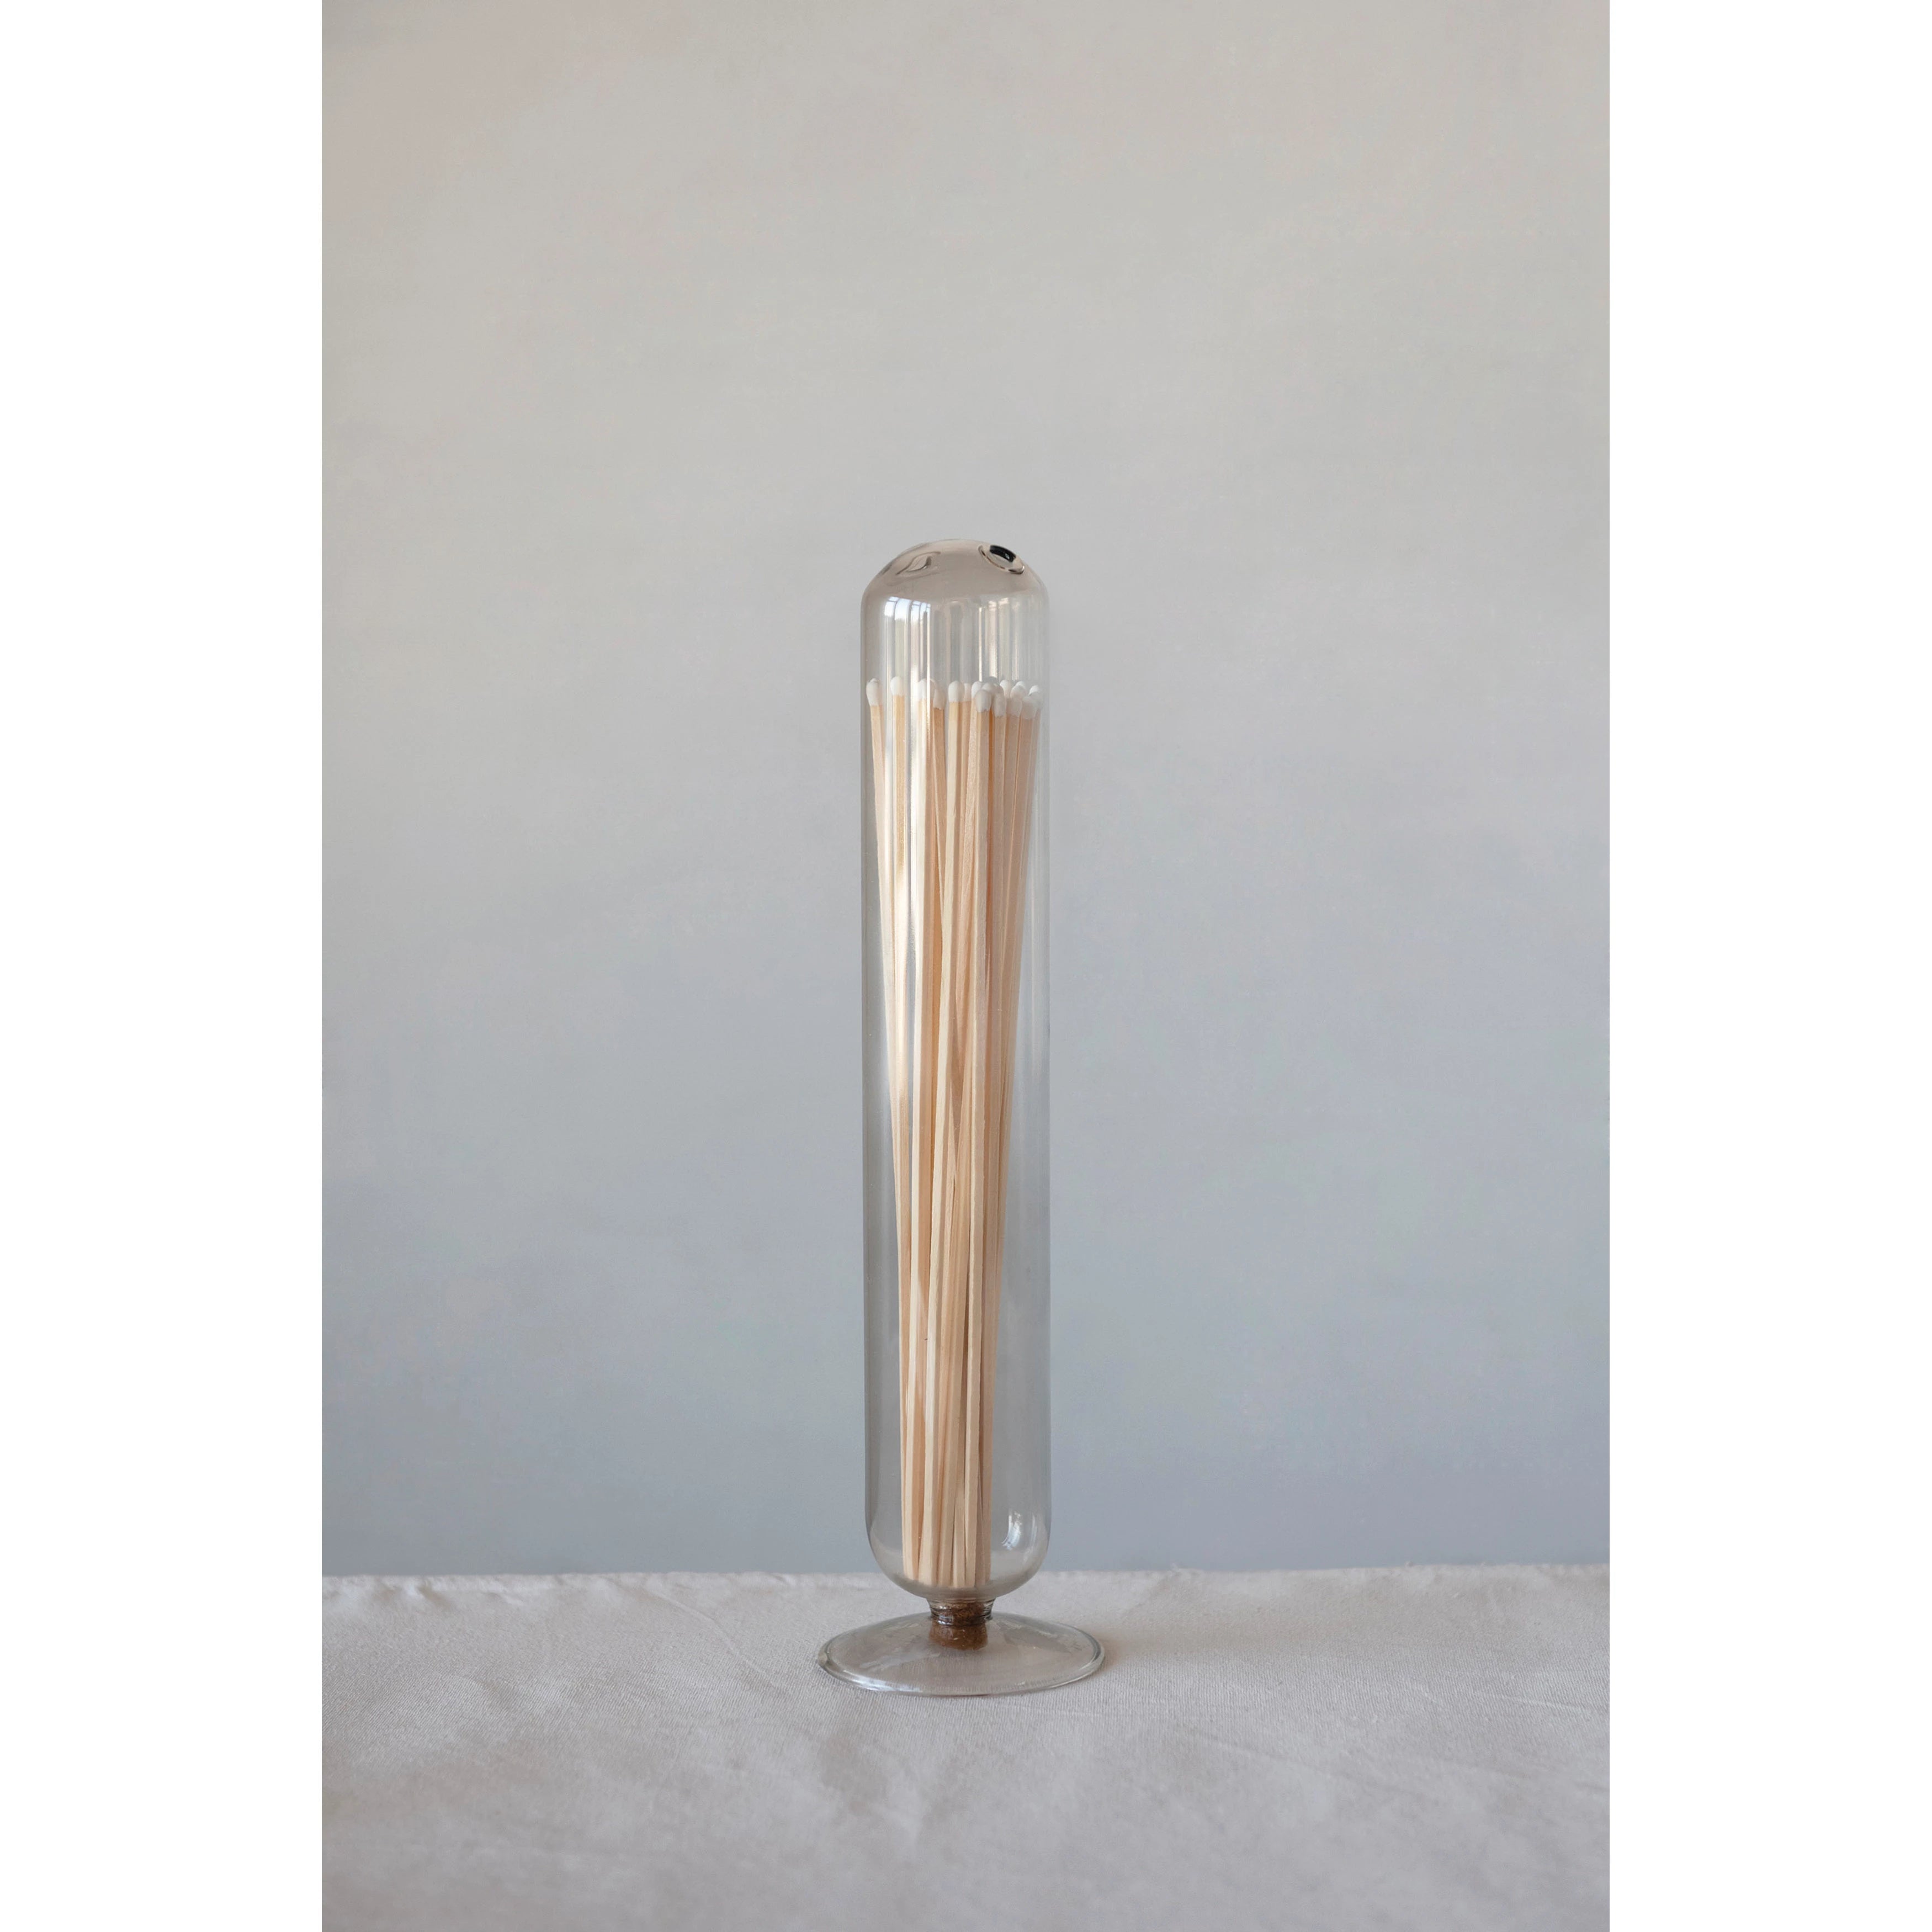 This Glass Match Holder is the perfect home for extra long match sticks — place next to all your candles or fireplace for easy access.  Size: 3.5" Round x 13.75"H